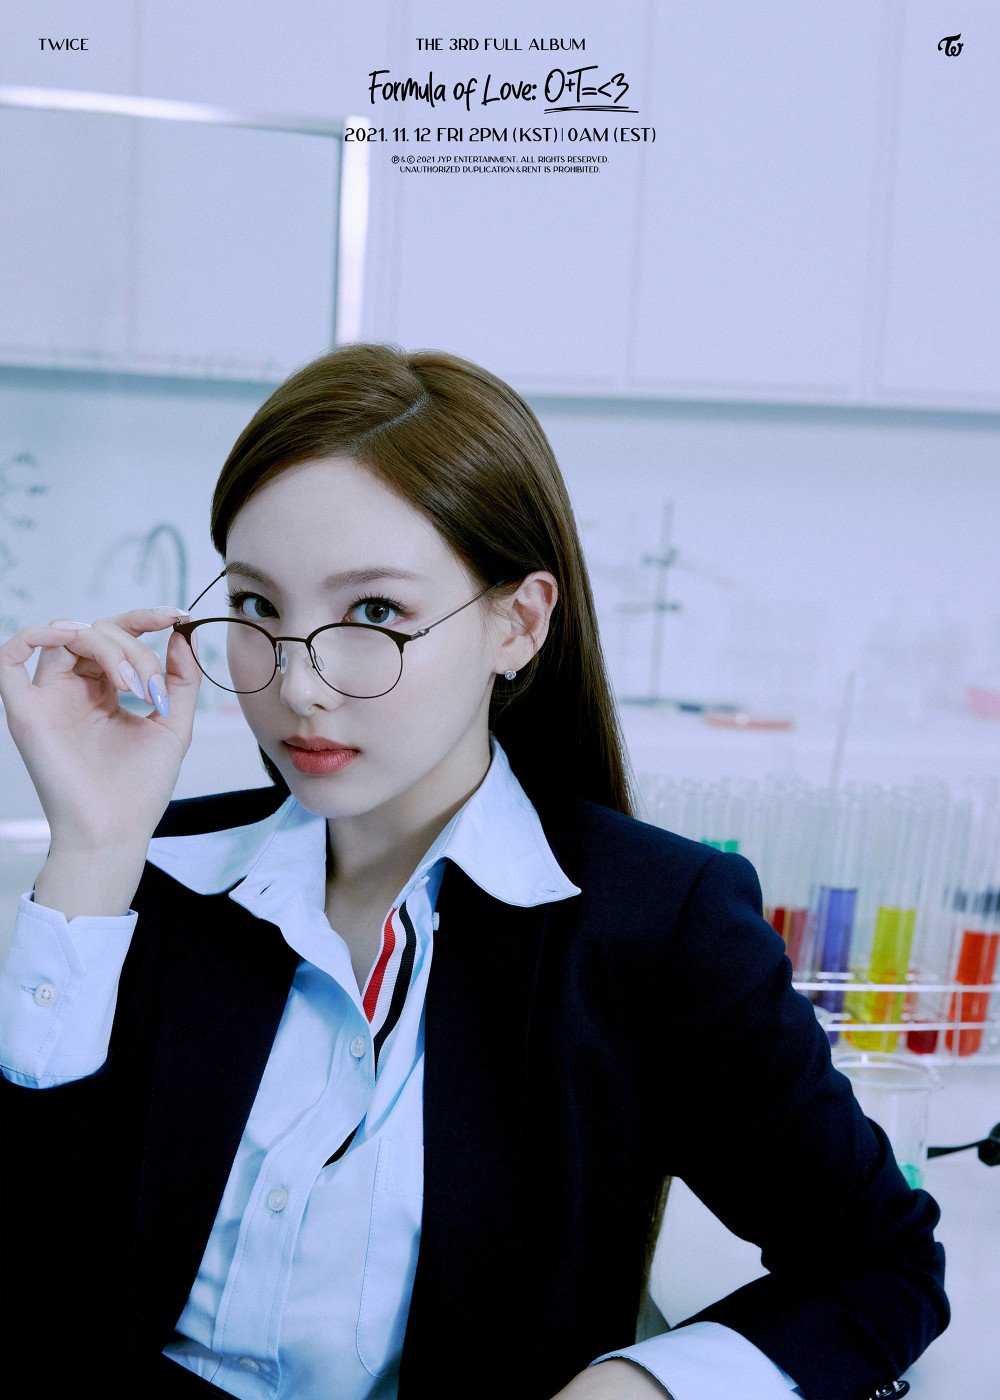 TWICE members are classy 'Scientists' in individual 'Formula of Love: O T=<3' teaser photo